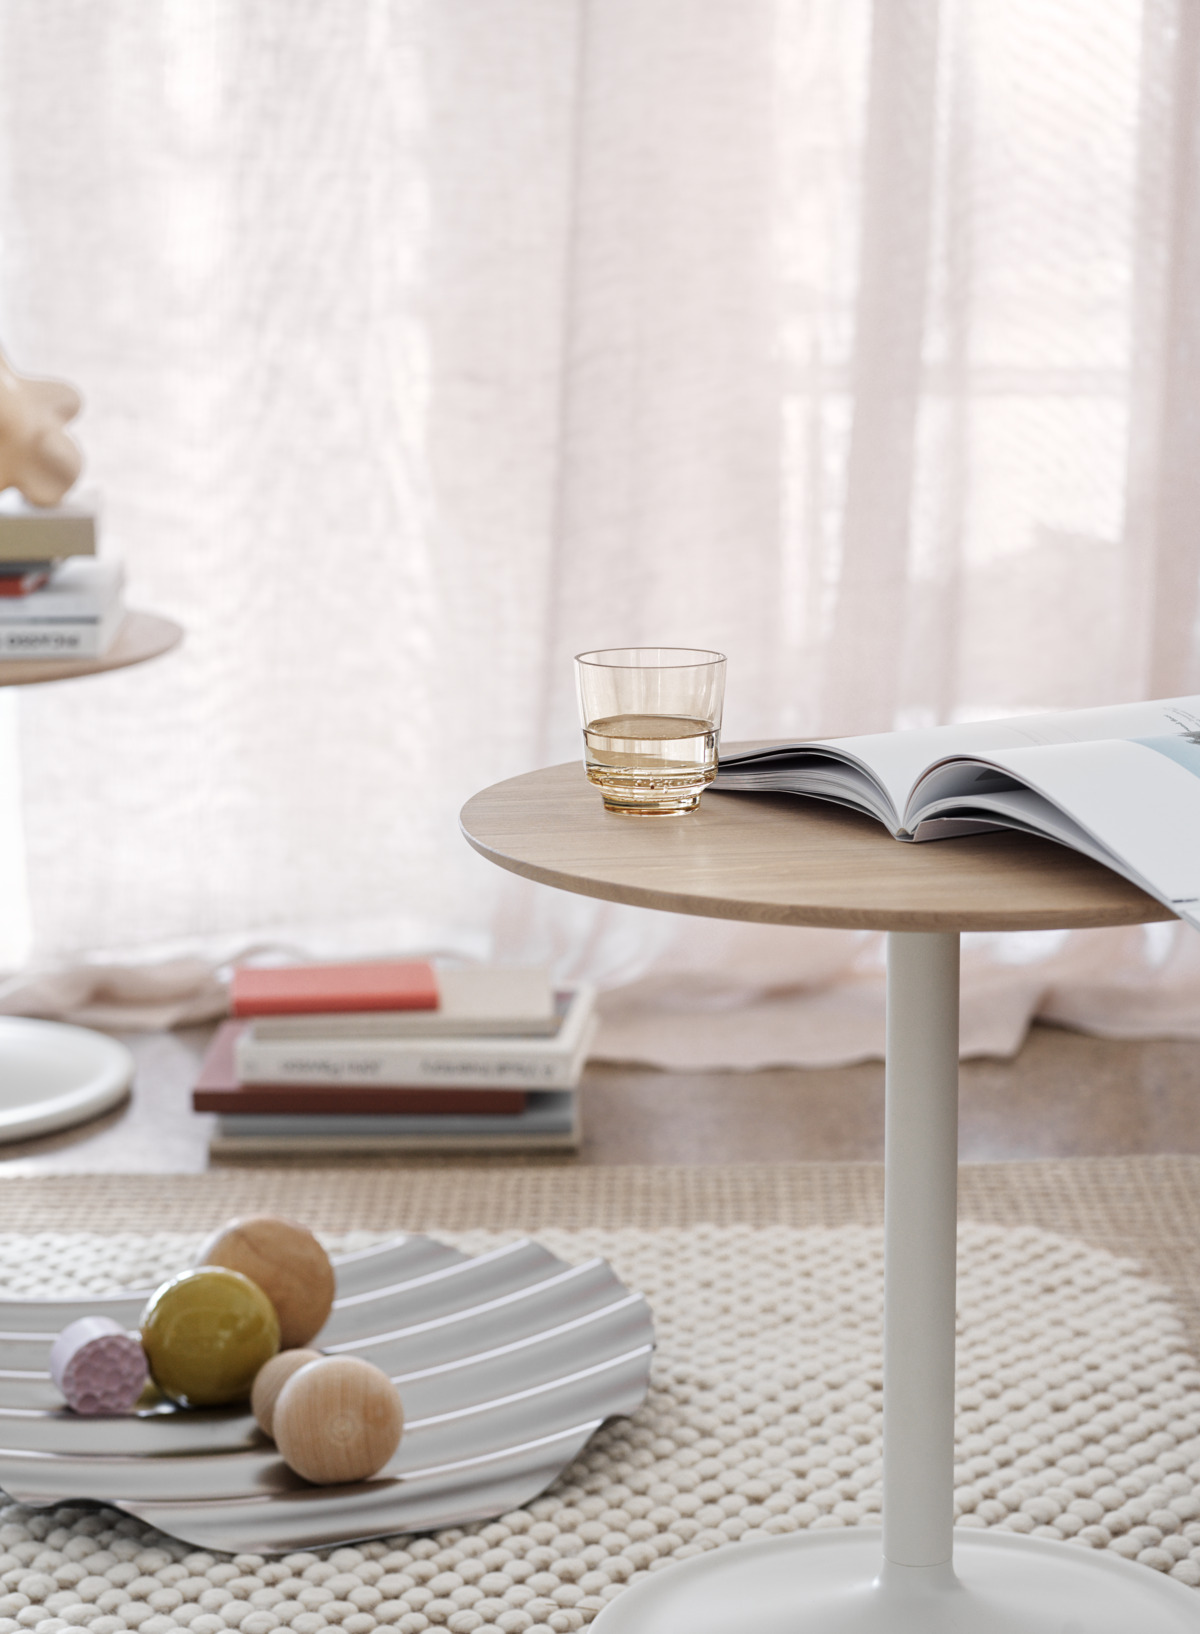 Soft Side Table Ø41 H48 cm Solid Oak/Off-White, Wave Tray, Raise Glass Ochre, Pebble Rug Pale Rose.